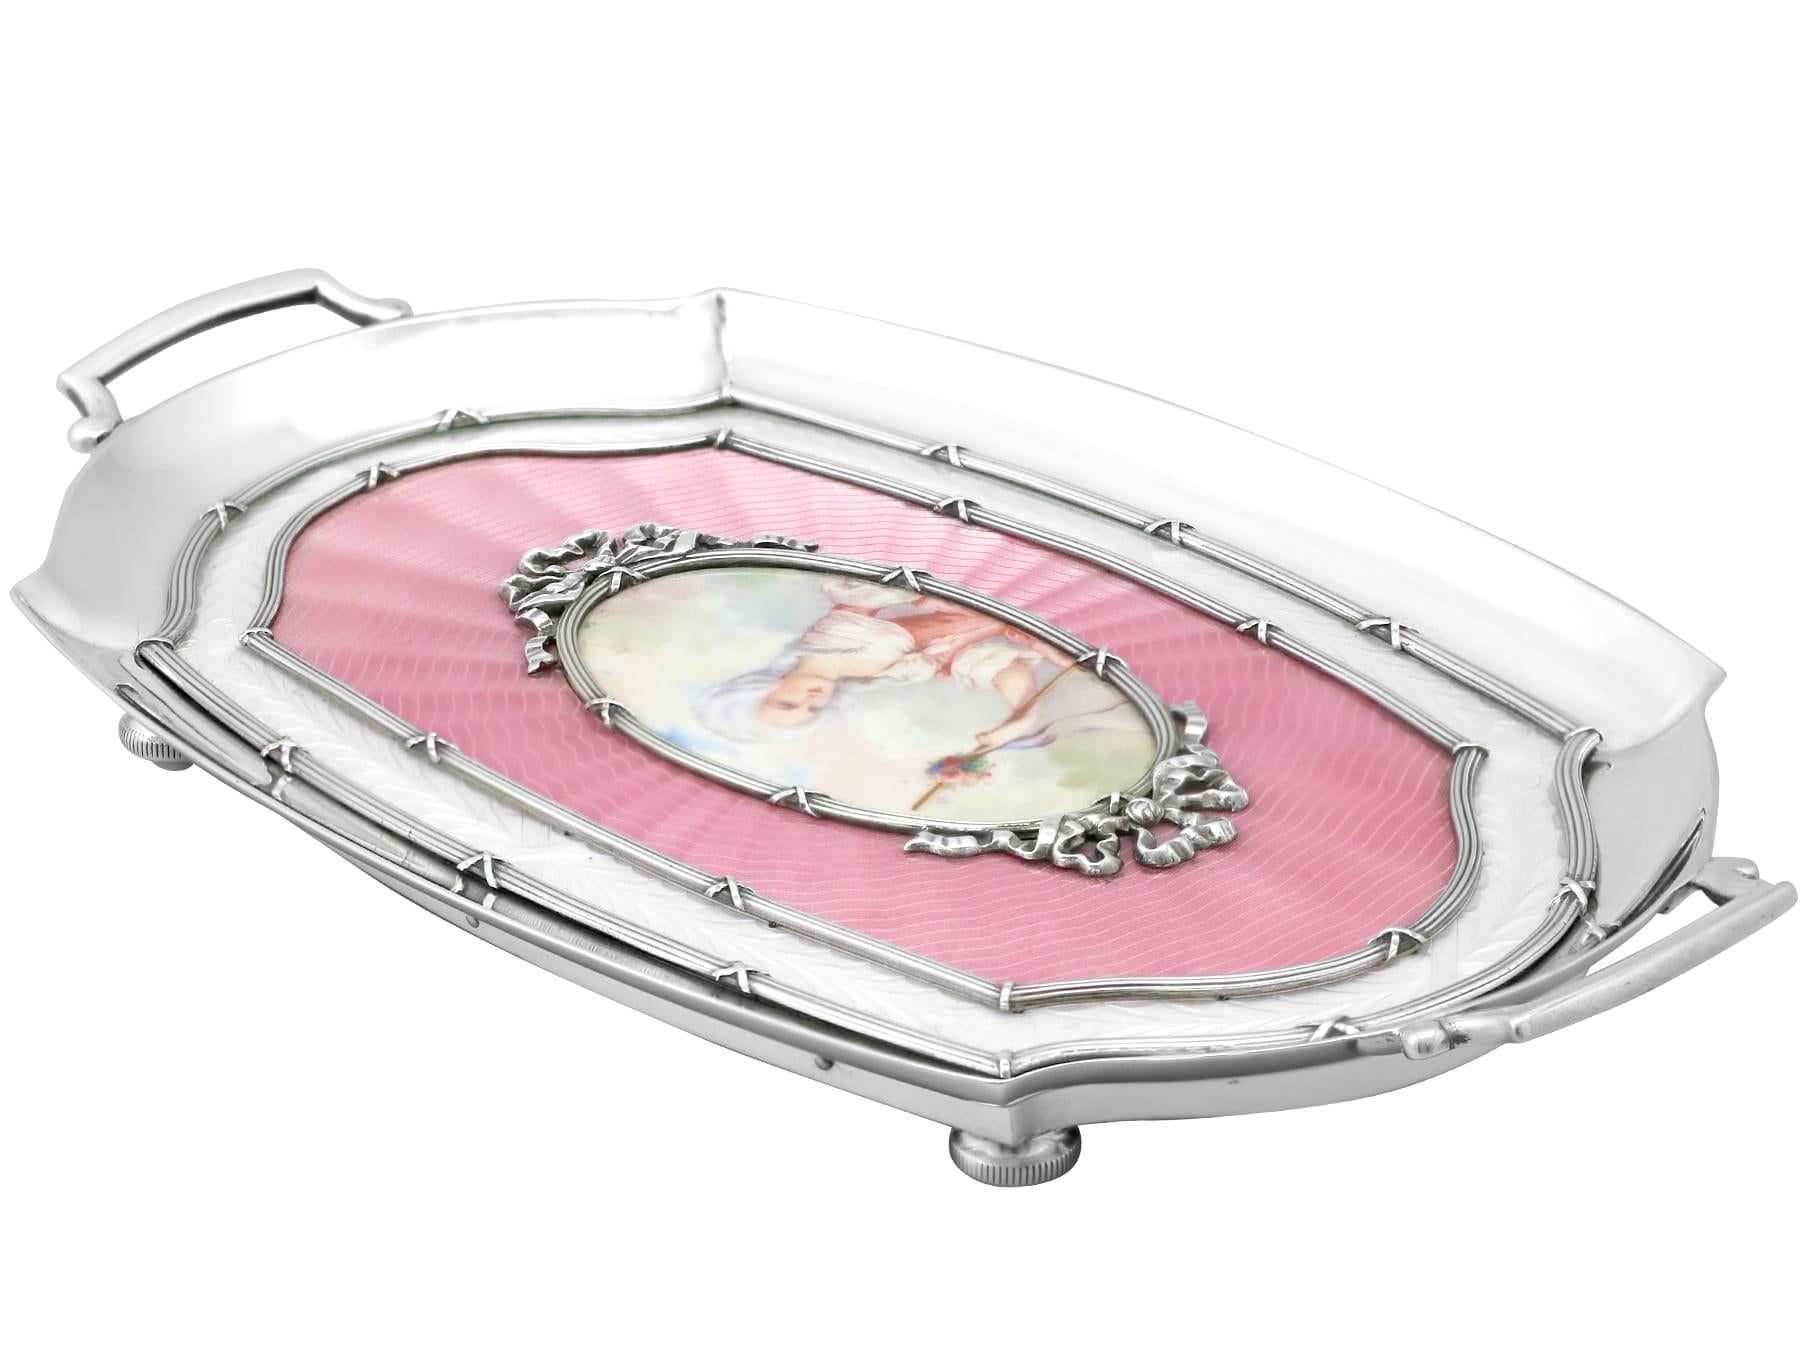 Early 20th Century Antique 1920s Austrian Silver and Enamel Boudoir Tray For Sale